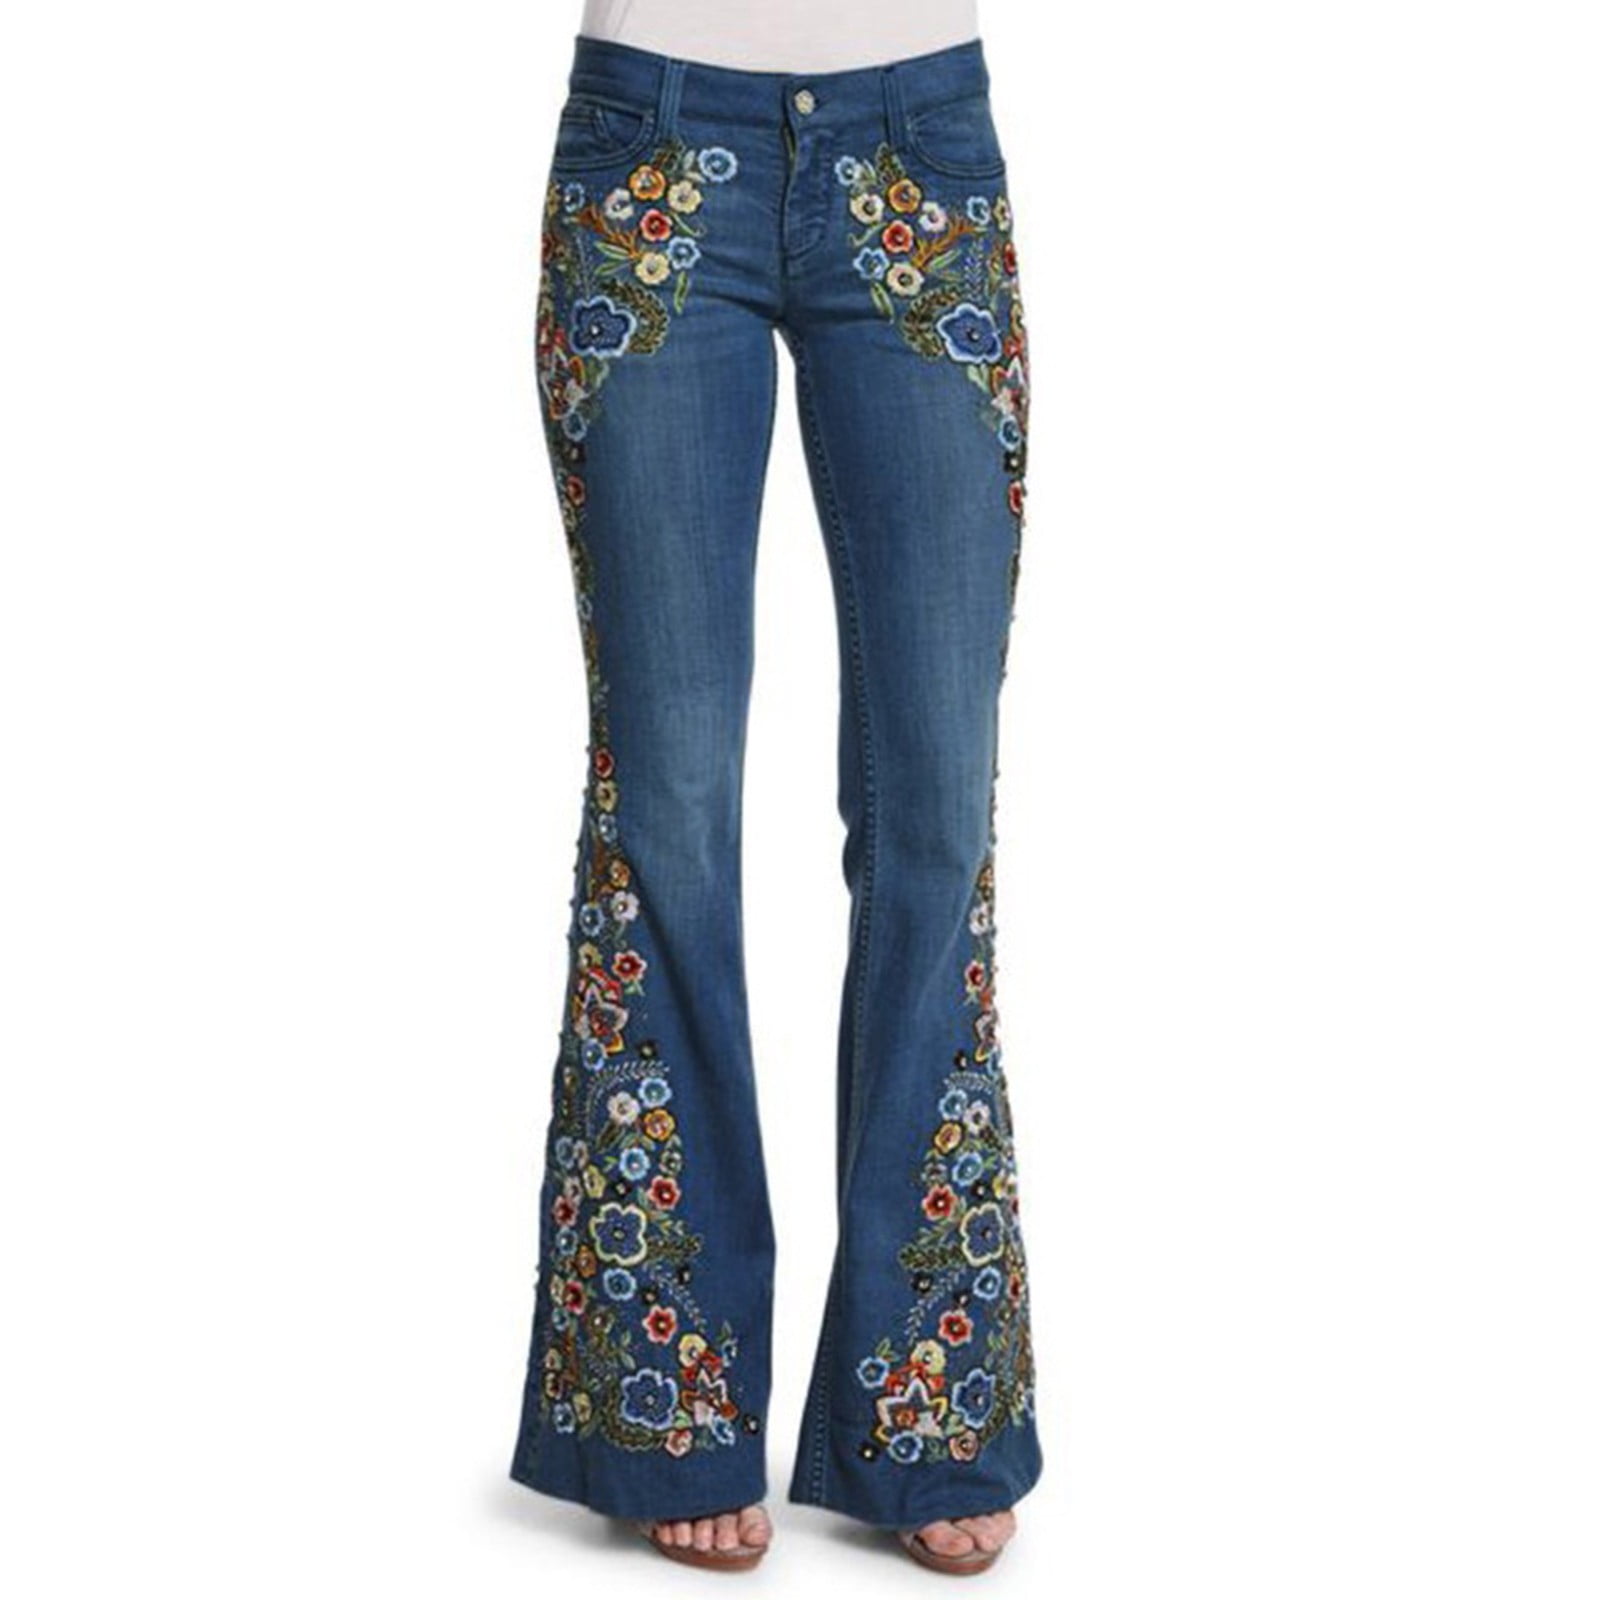 Women's Embroidery Floral Flared Jeans Casual Bell Bottom Long Denim Pants